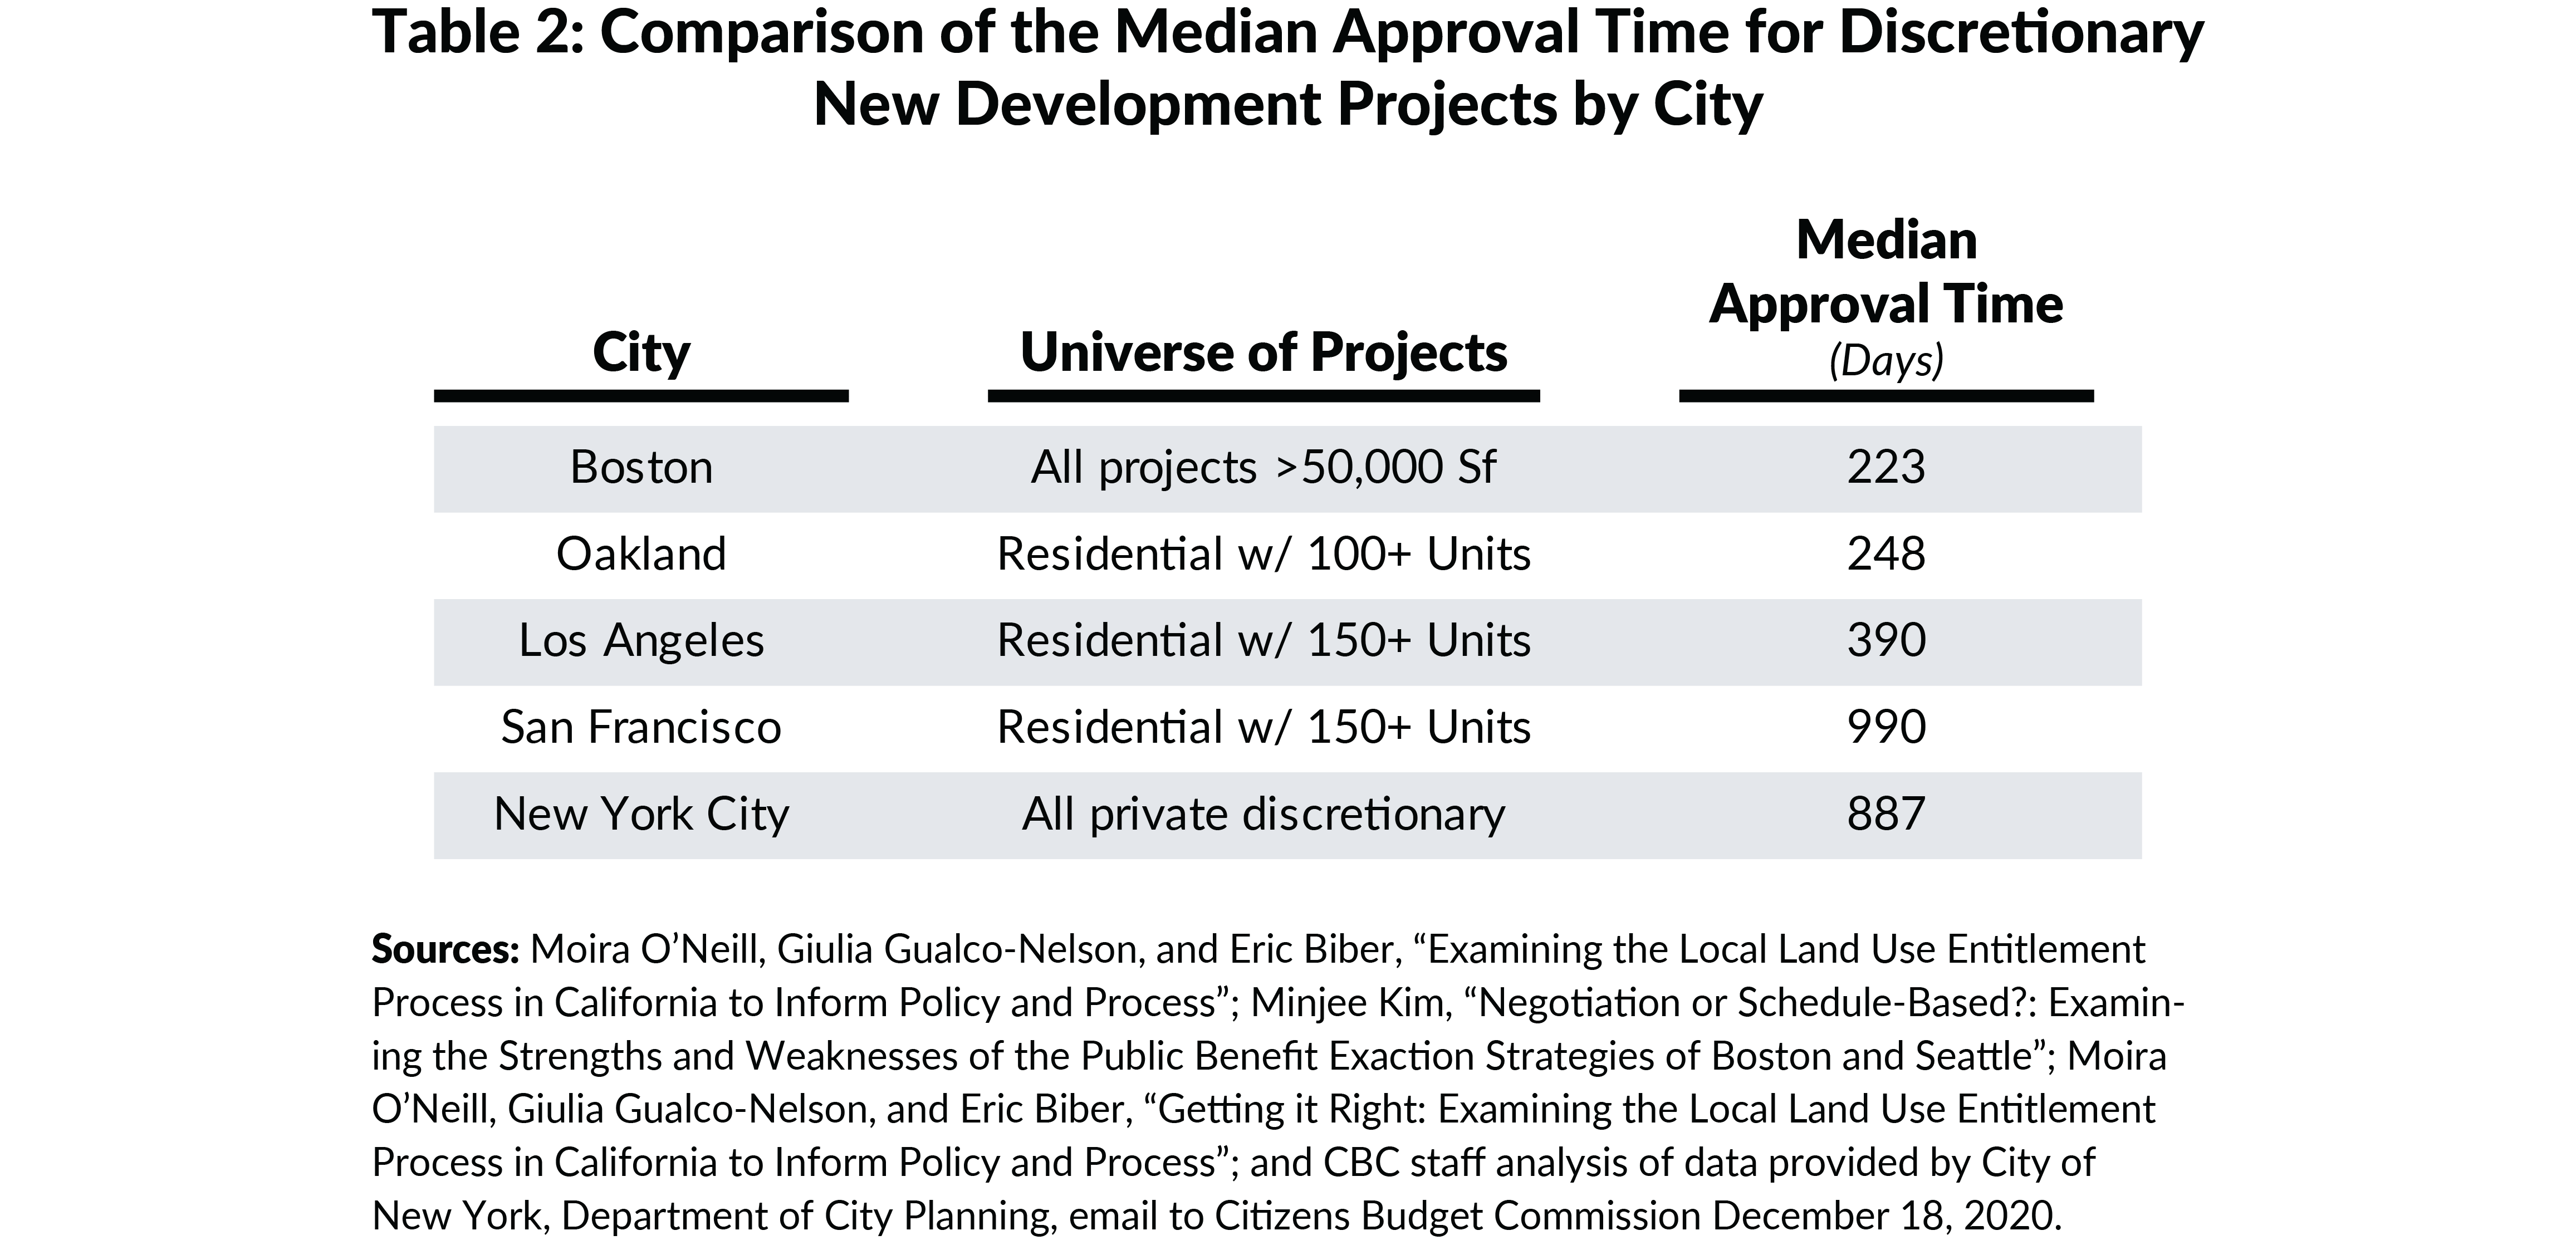 Table 2: Comparison of the Median Approval Time for DiscretionaryNew Development Projects by City